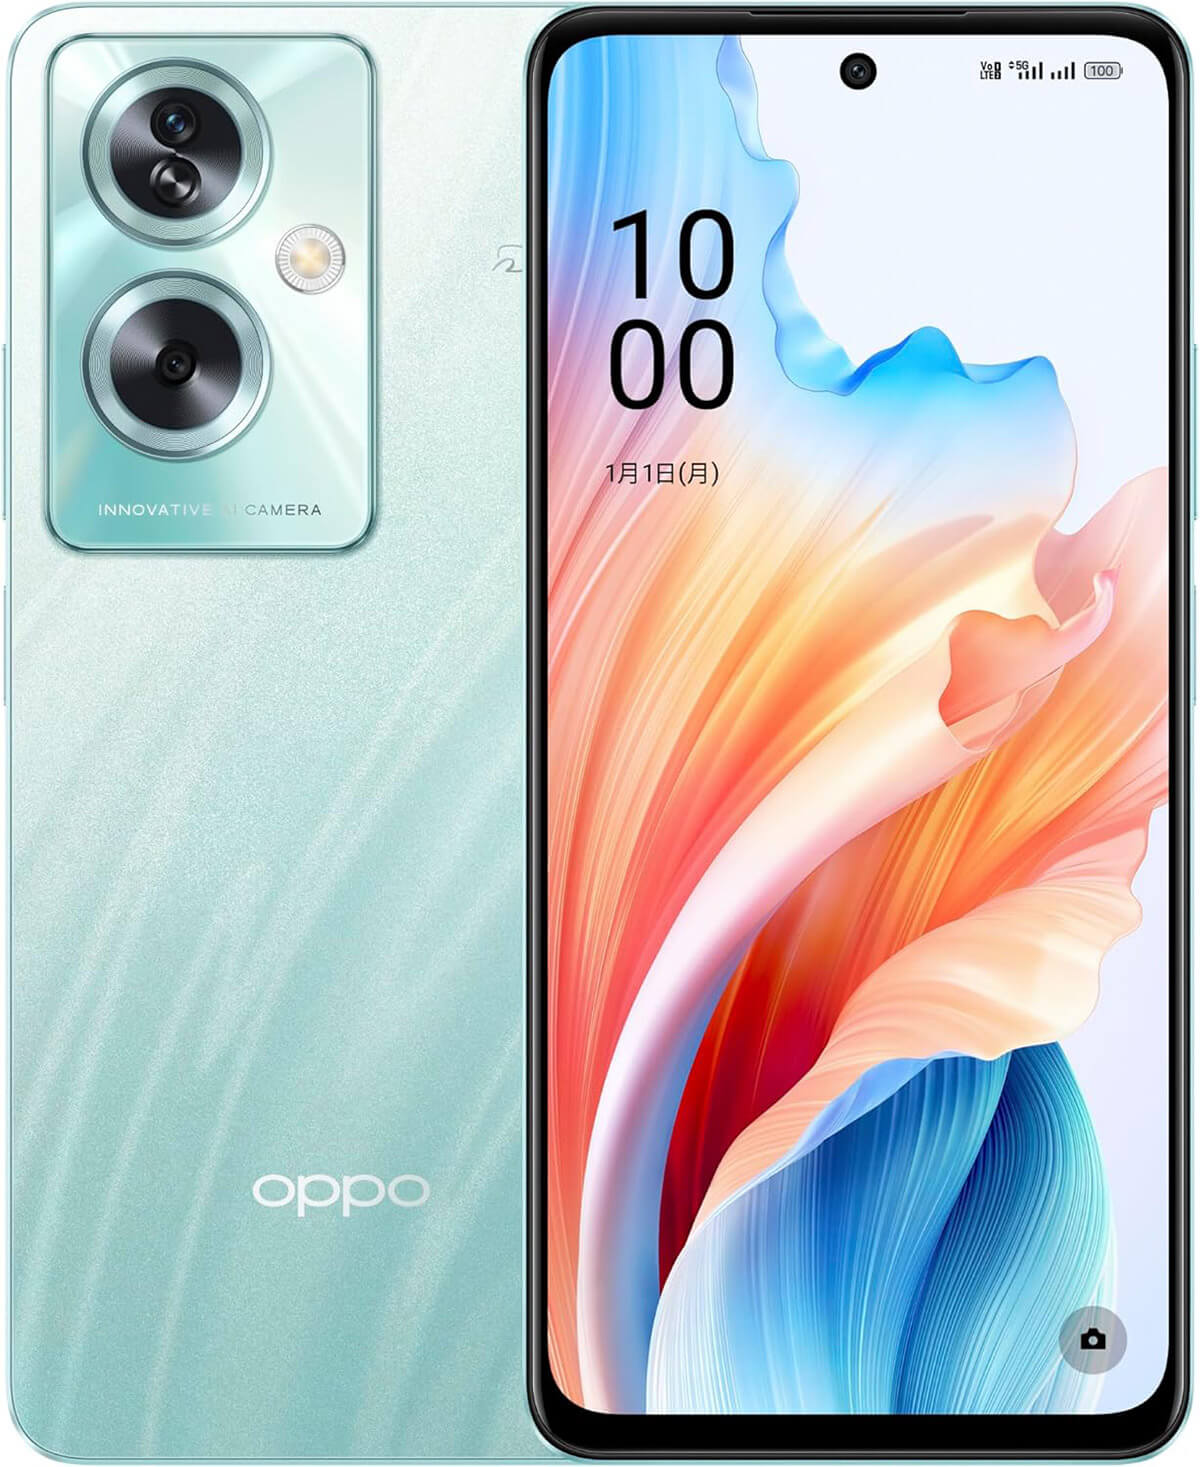 OPPOの最新モデル「OPPO A79 5G